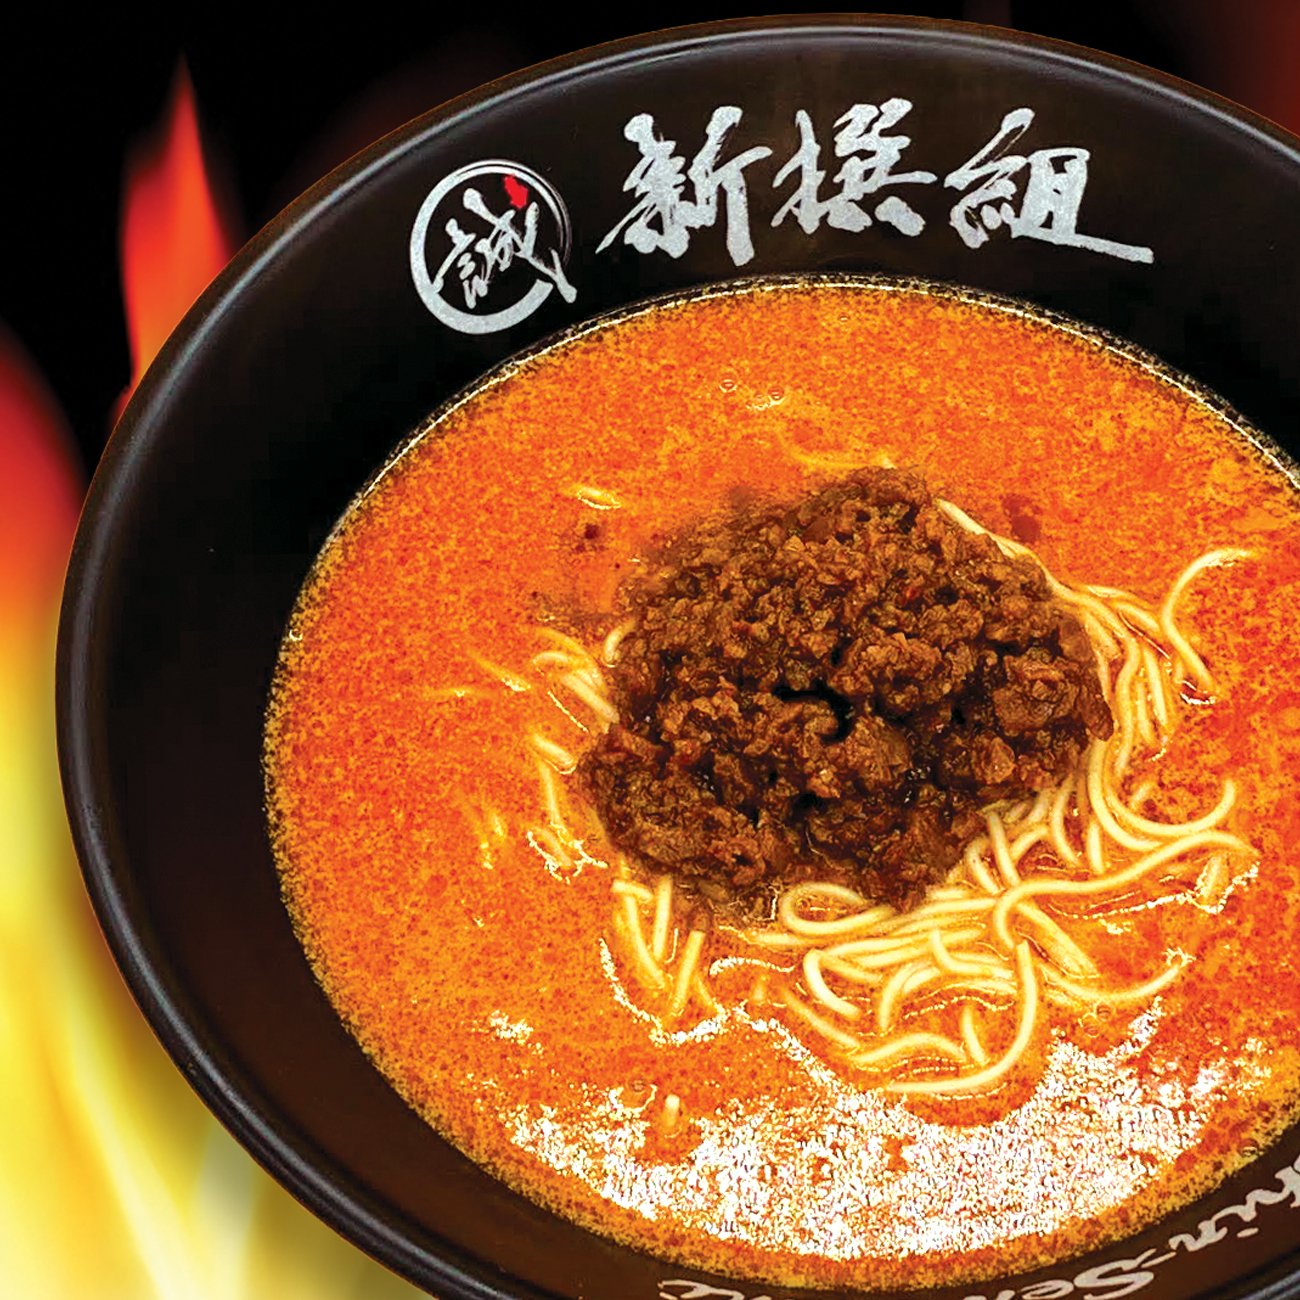 black bowl with logo and text with ramen noodles, soup and ground beef over a fire background